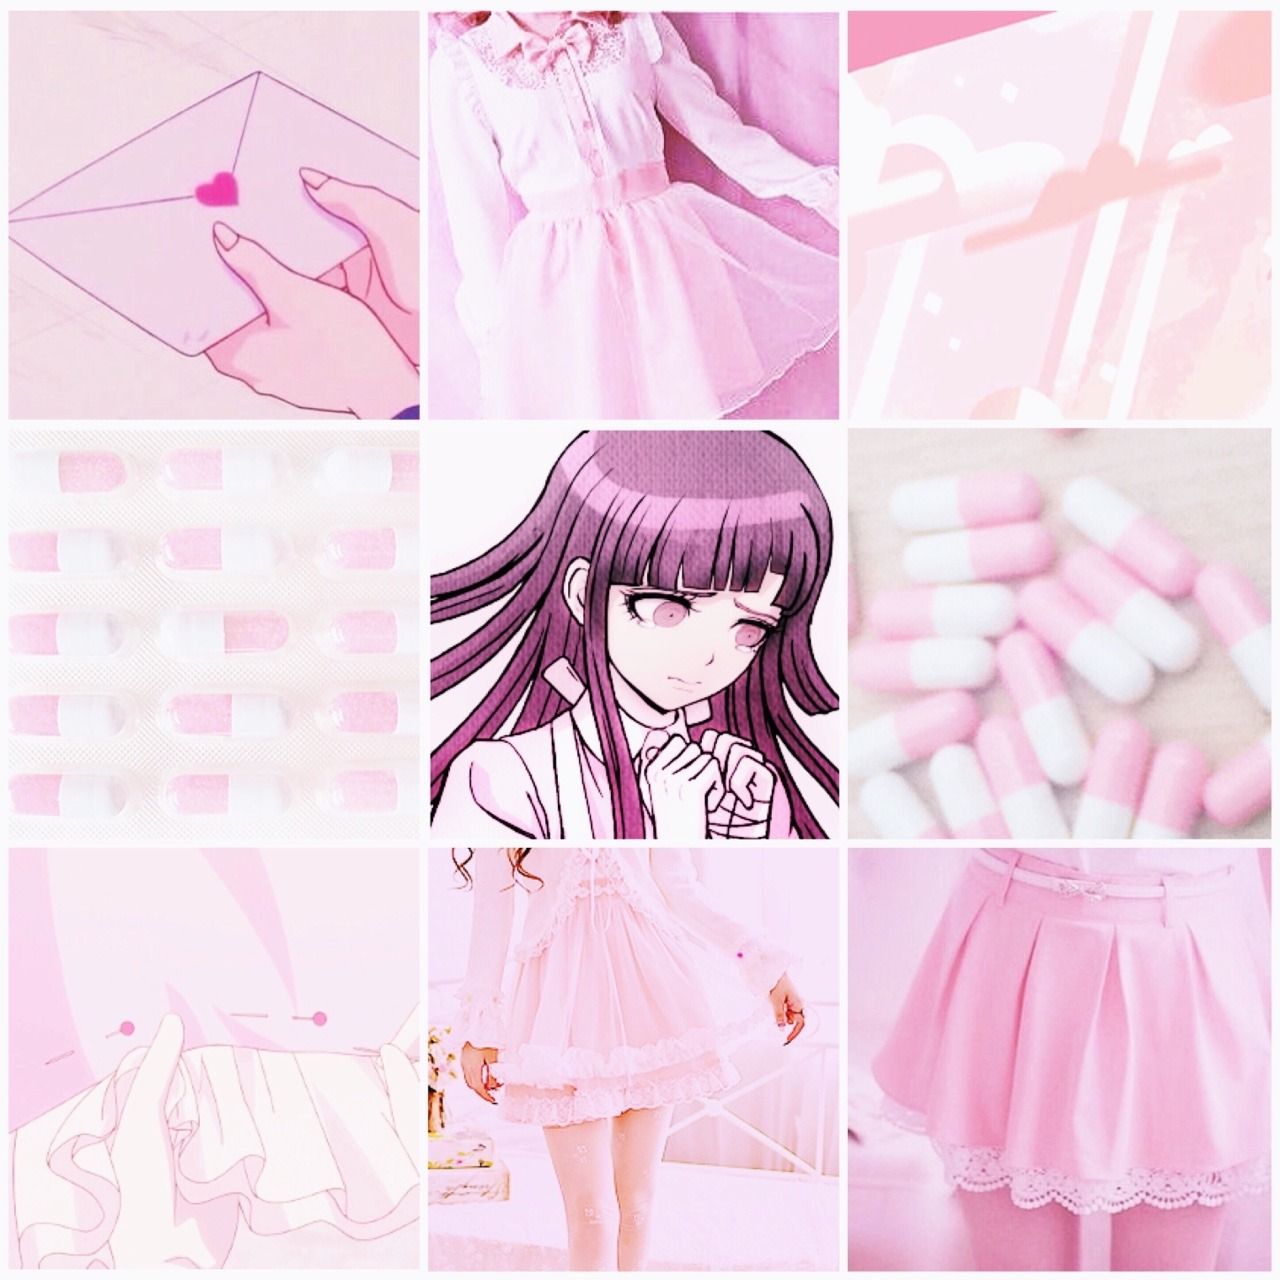 shslcare: “pink mikan tsumiki aesthetic for anon! ”. Mikan